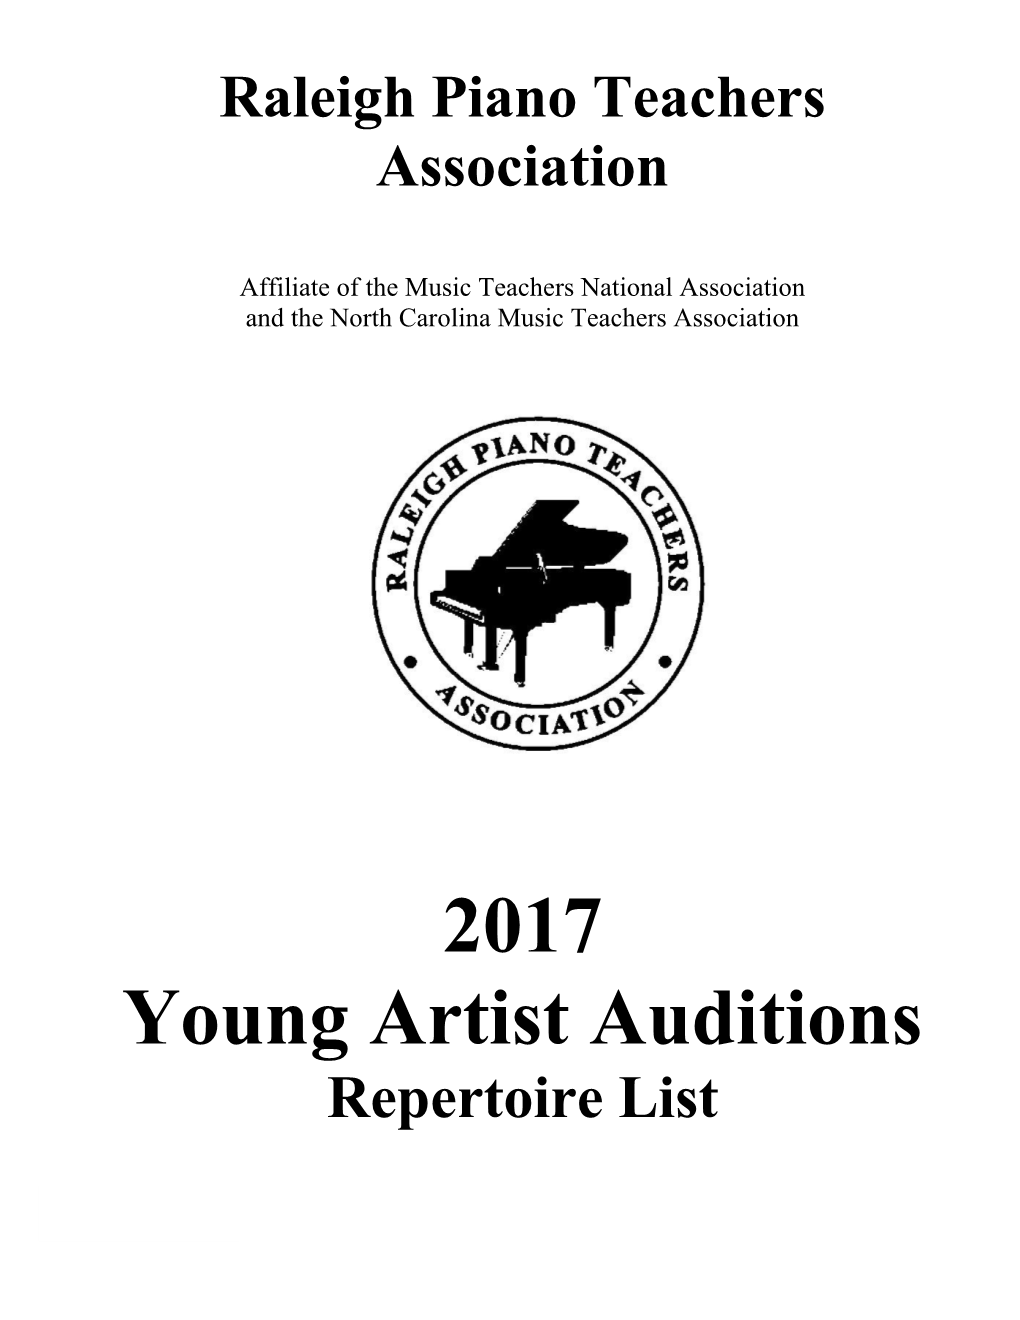 2017 Young Artist Auditions Repertoire List